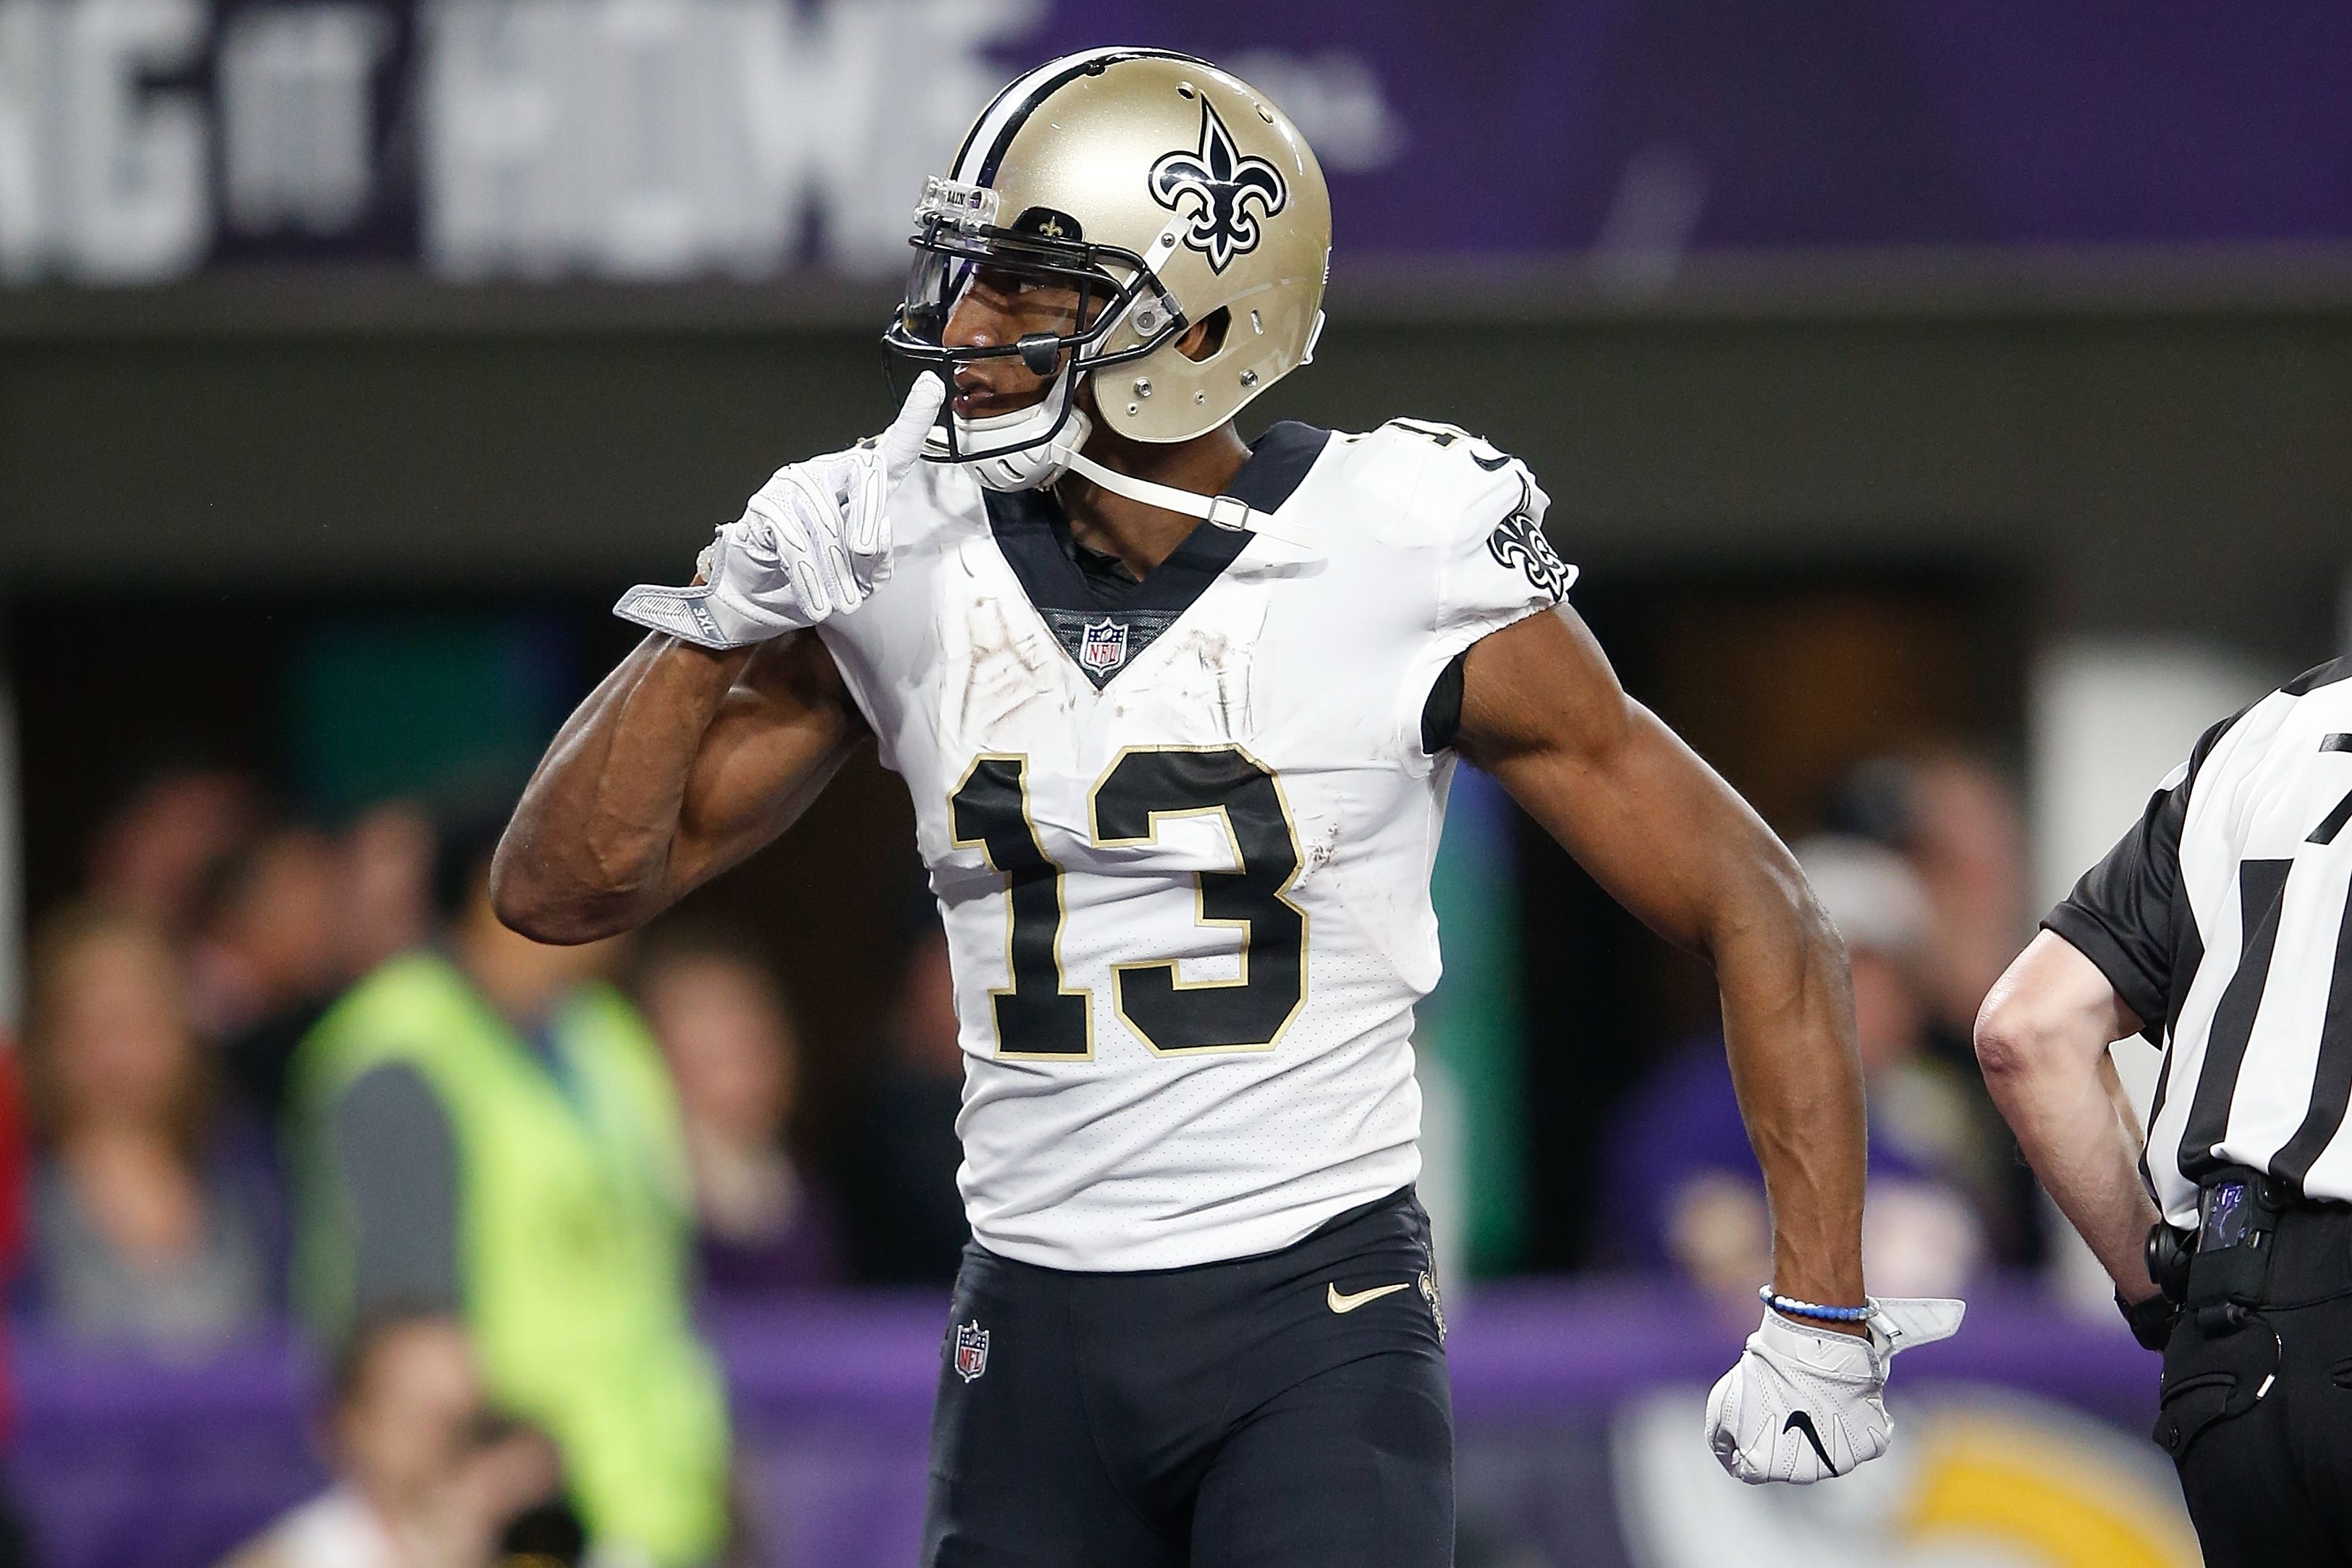 Michael Thomas taunting opposing team's fans